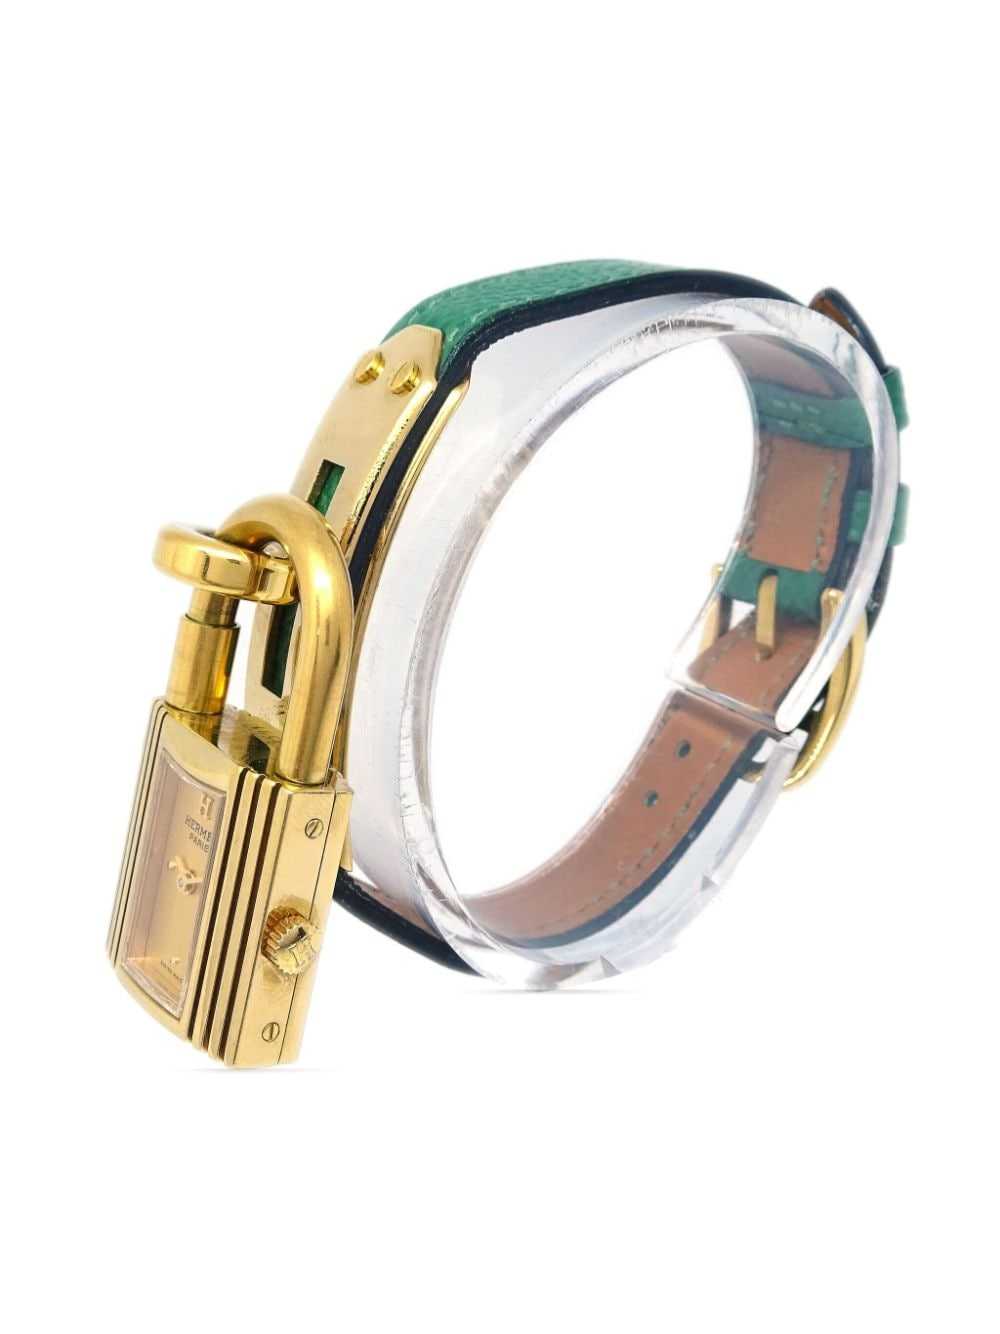 Hermès Pre-Owned 1991 Kelly 38mm - Gold - image 3